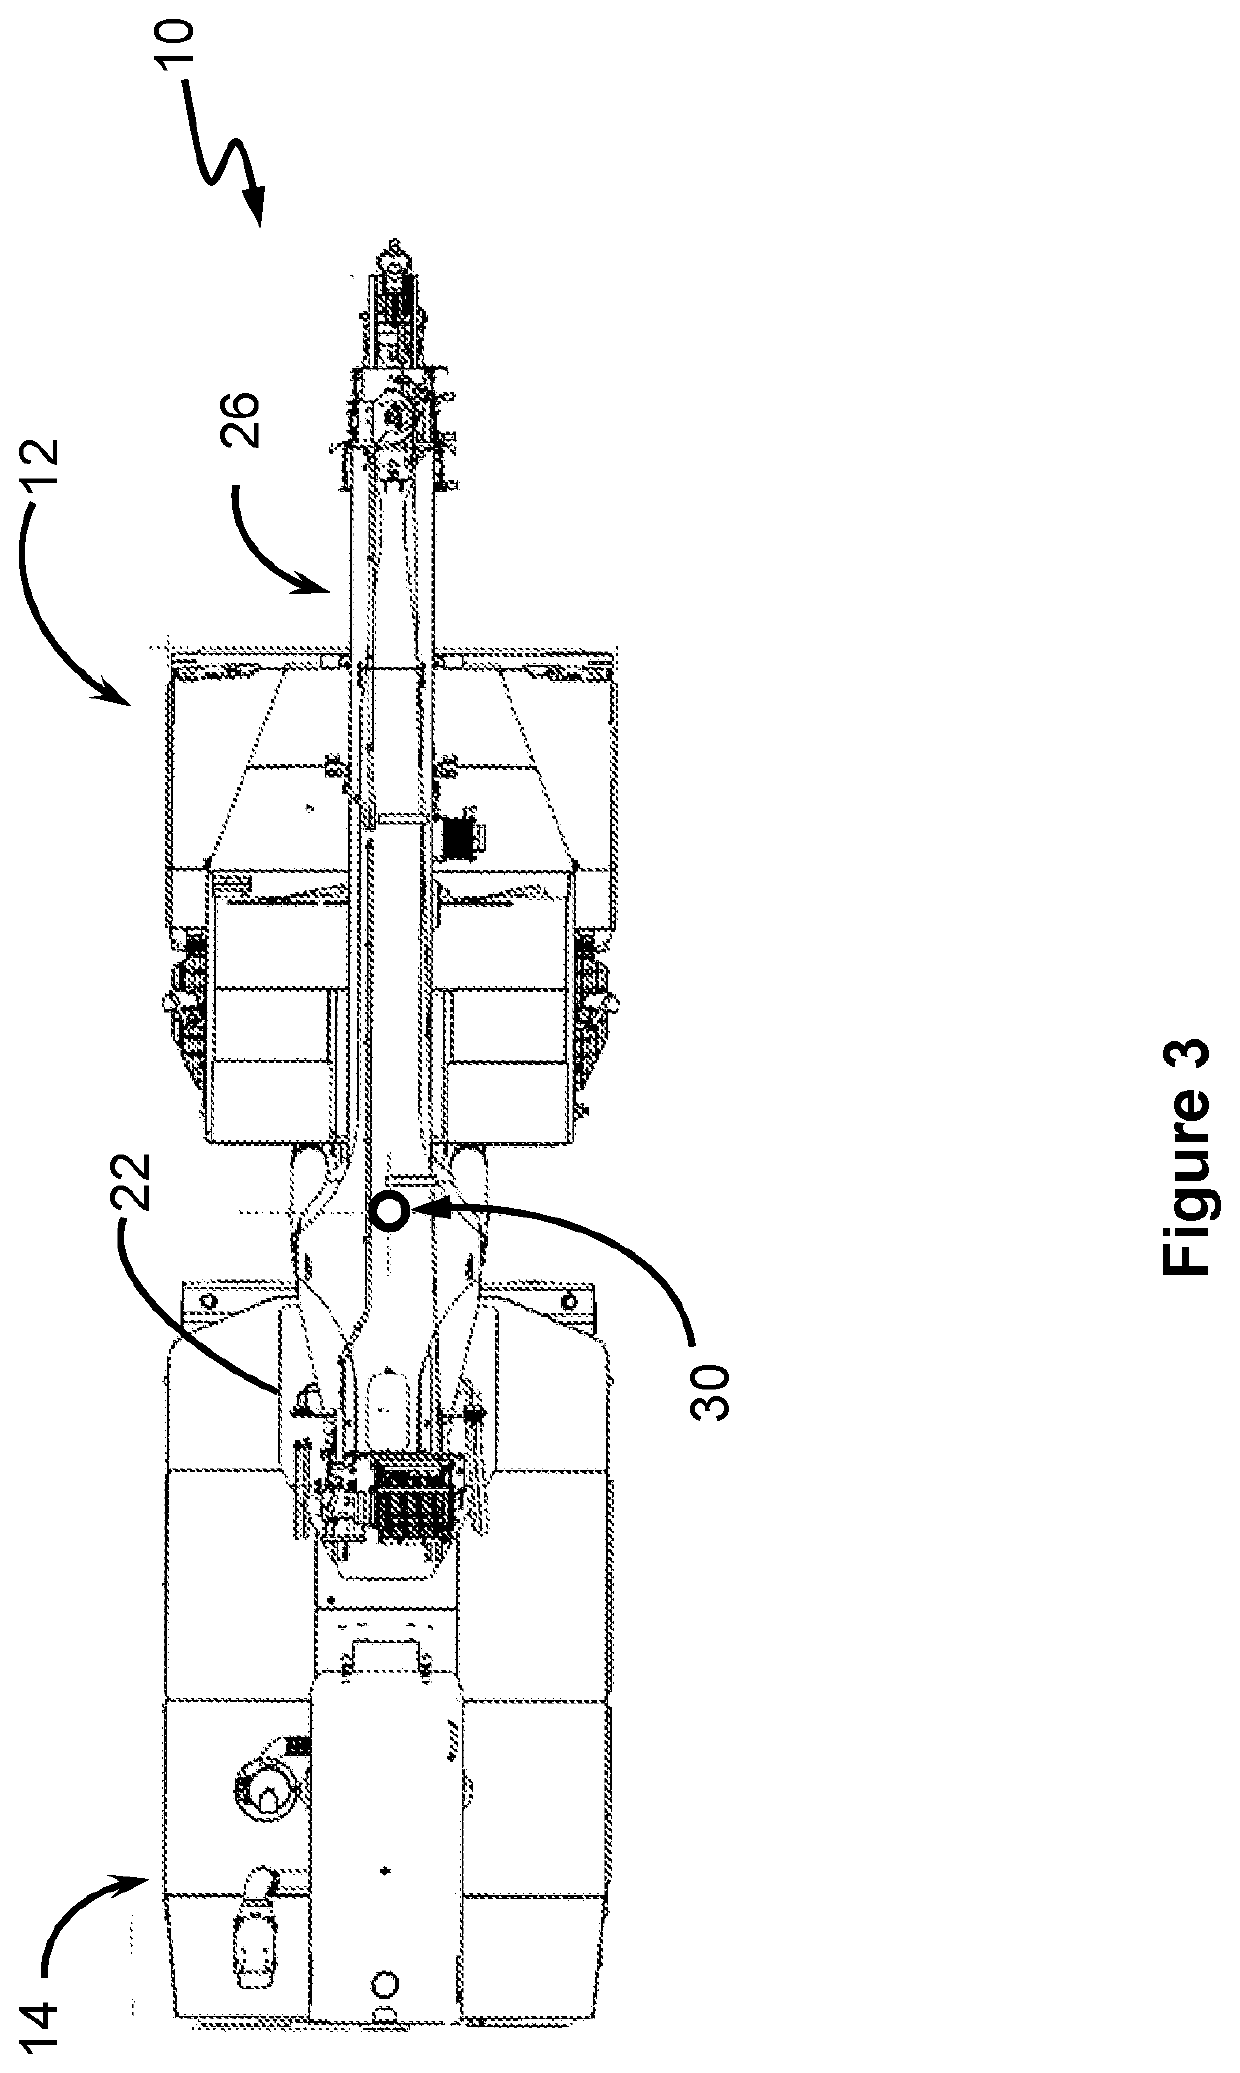 Pick and carry crane suspension